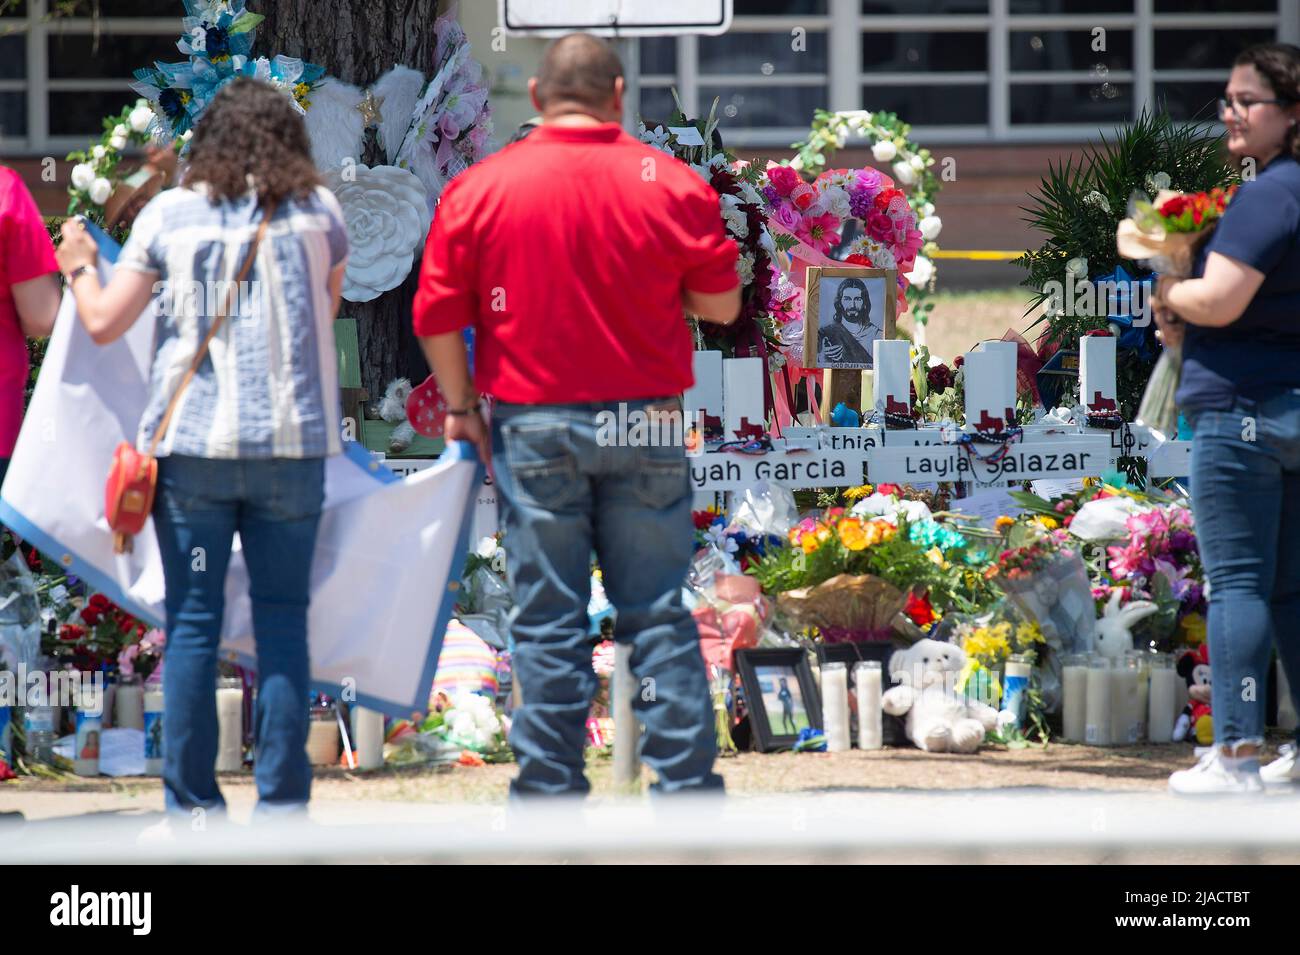 May 29, 2022: Crosses bear the names of the shooting victims at Robb Elementary School, makeshift memorial in Uvalde. Residents give their respects to the 19 children killed in the mass shooting. Uvalde, Texas. Mario Cantu/CSM. Stock Photo